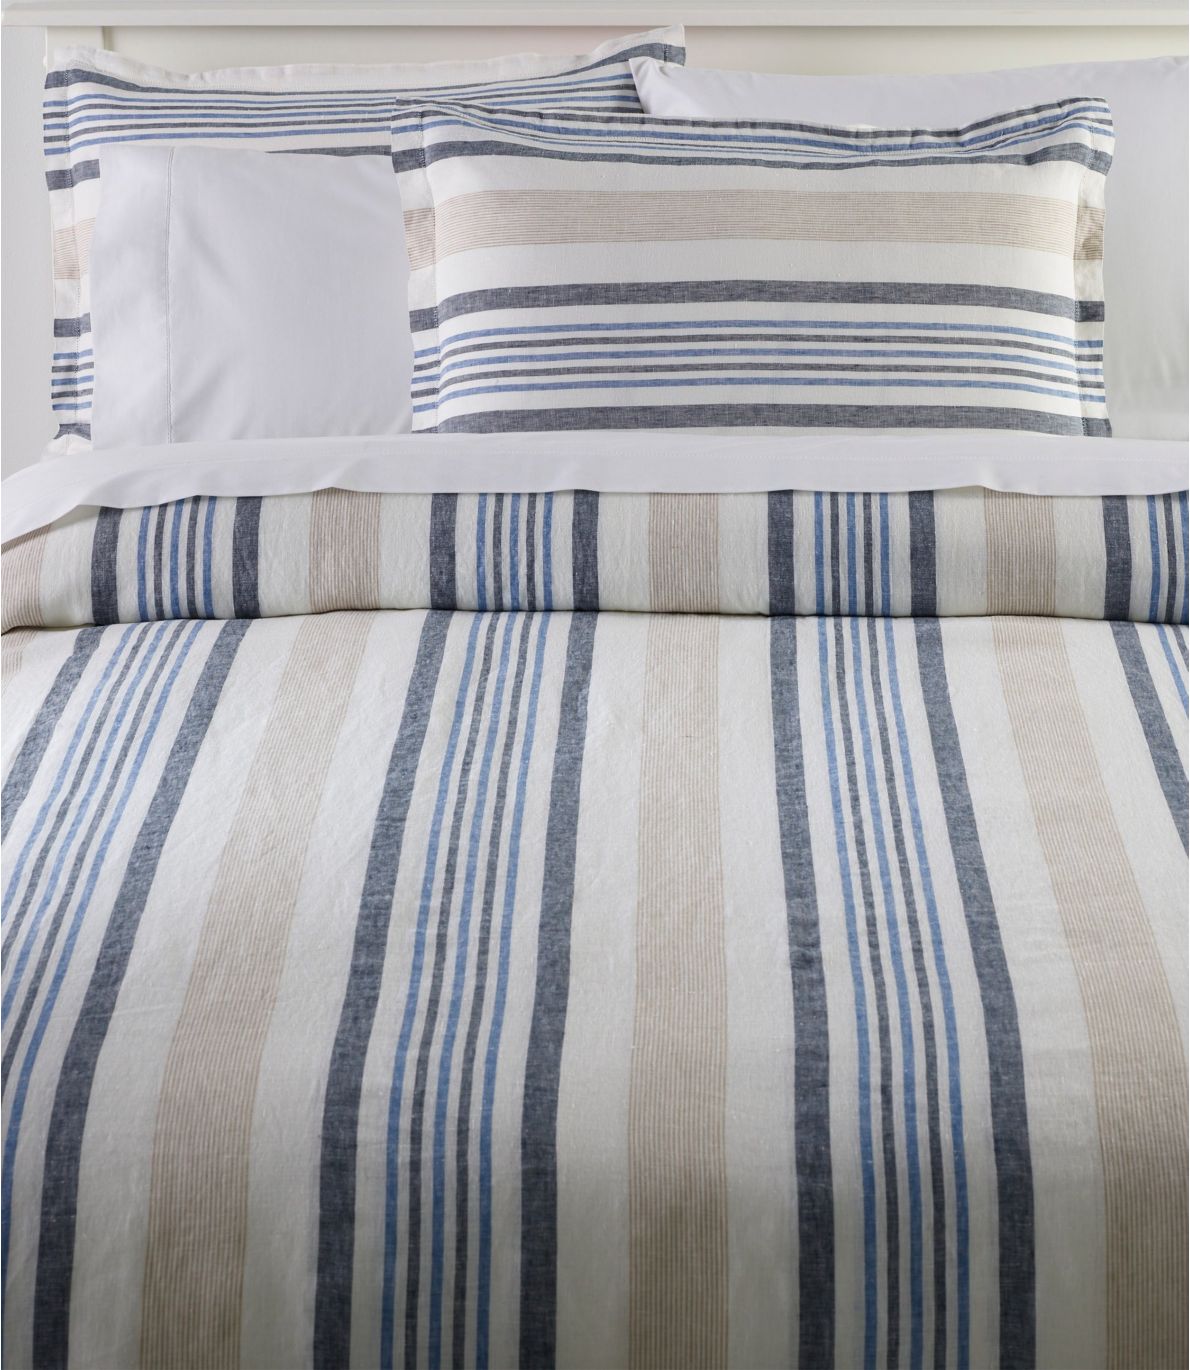 Sunwashed Linen Comforter Cover Collection